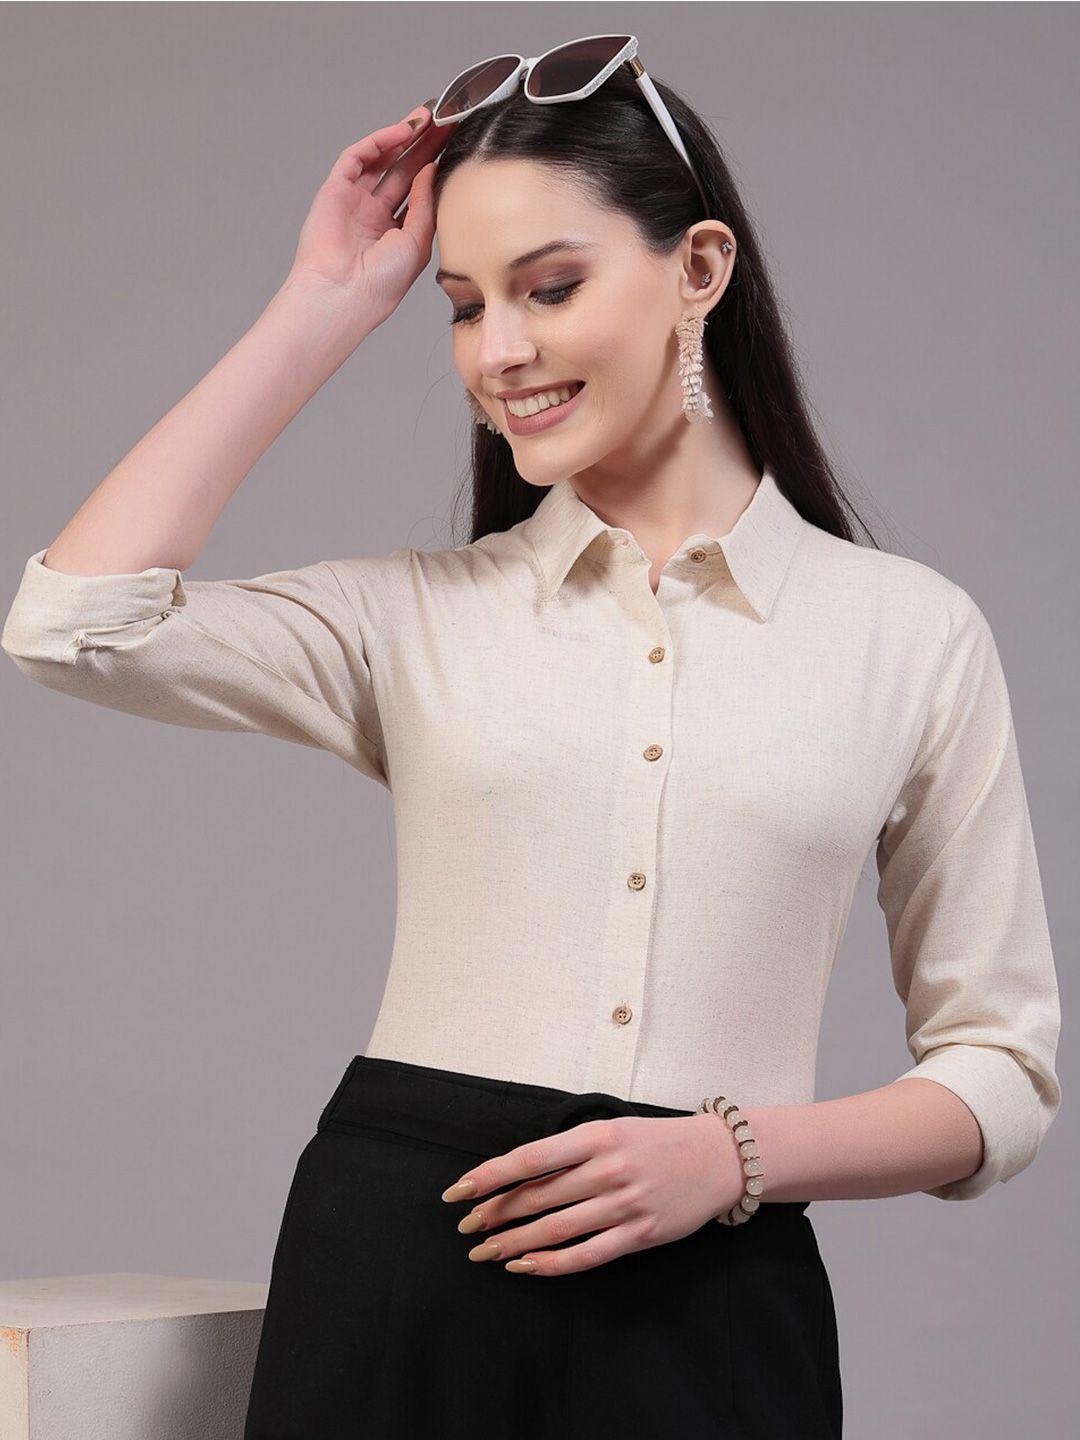 style quotient women classic opaque formal shirt